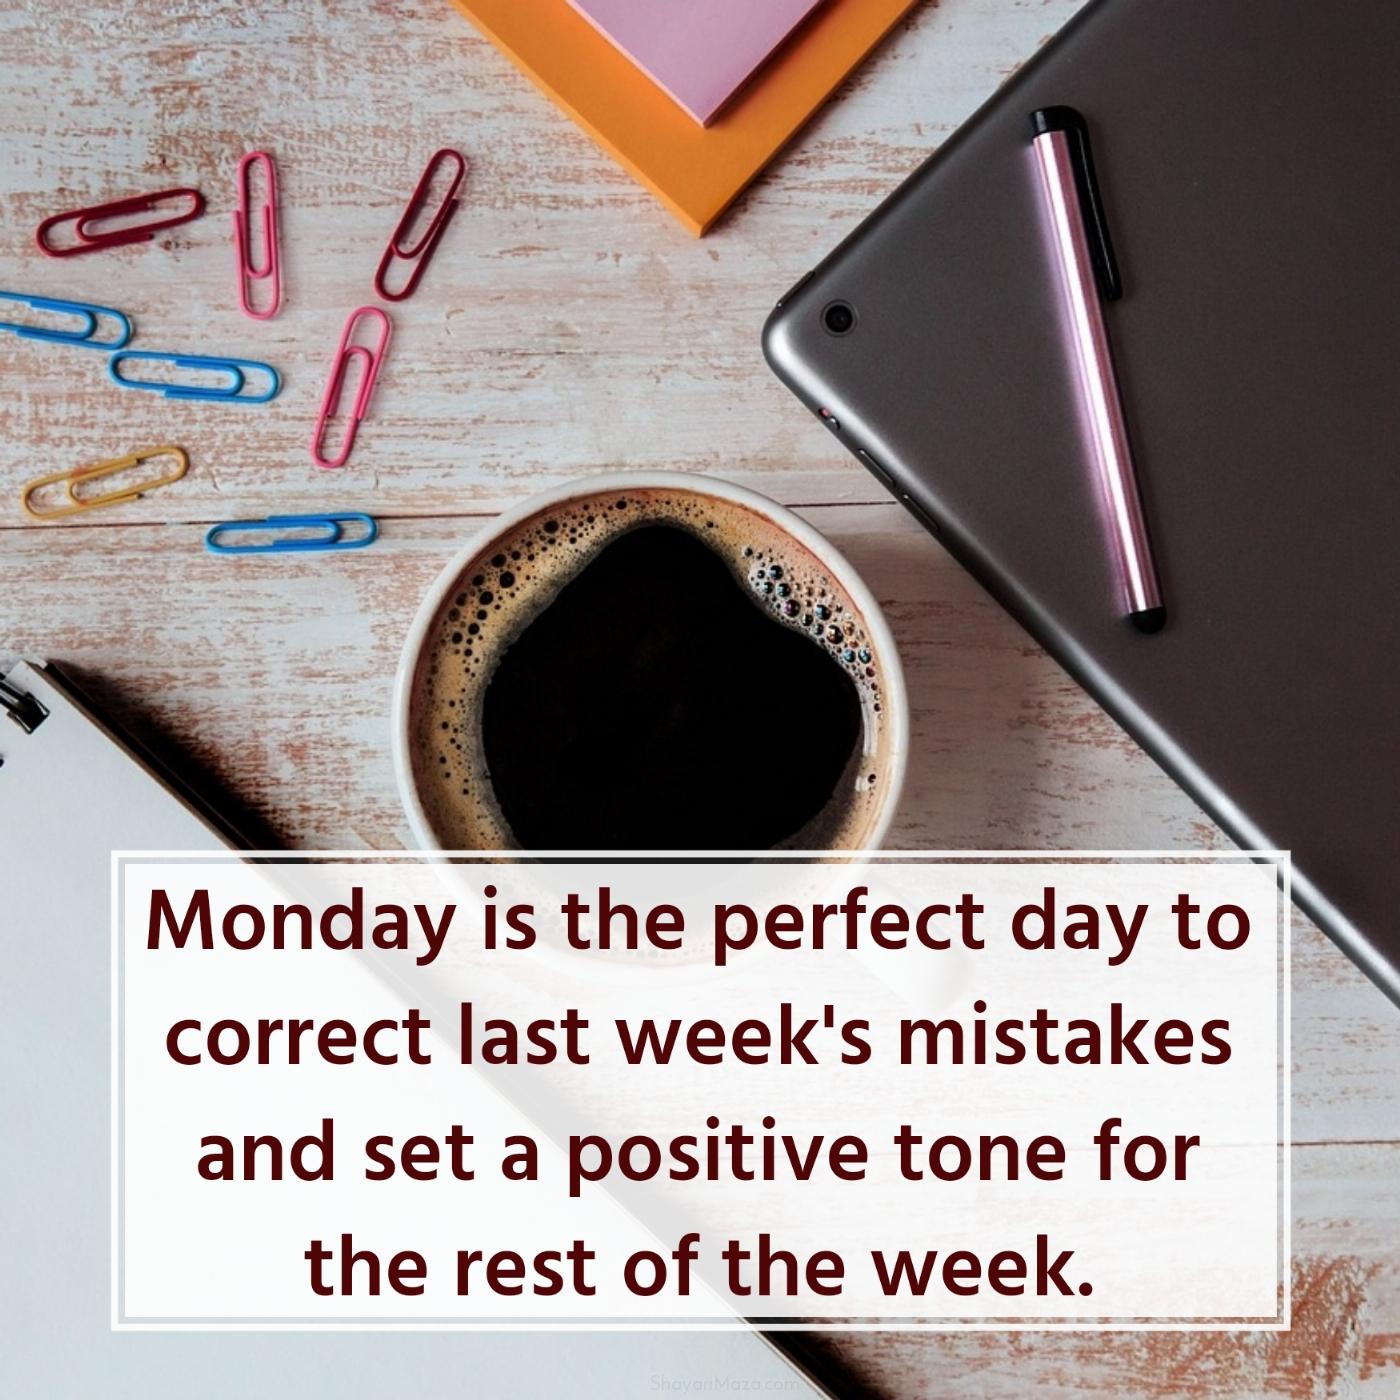 Monday is the perfect day to correct last week's mistakes